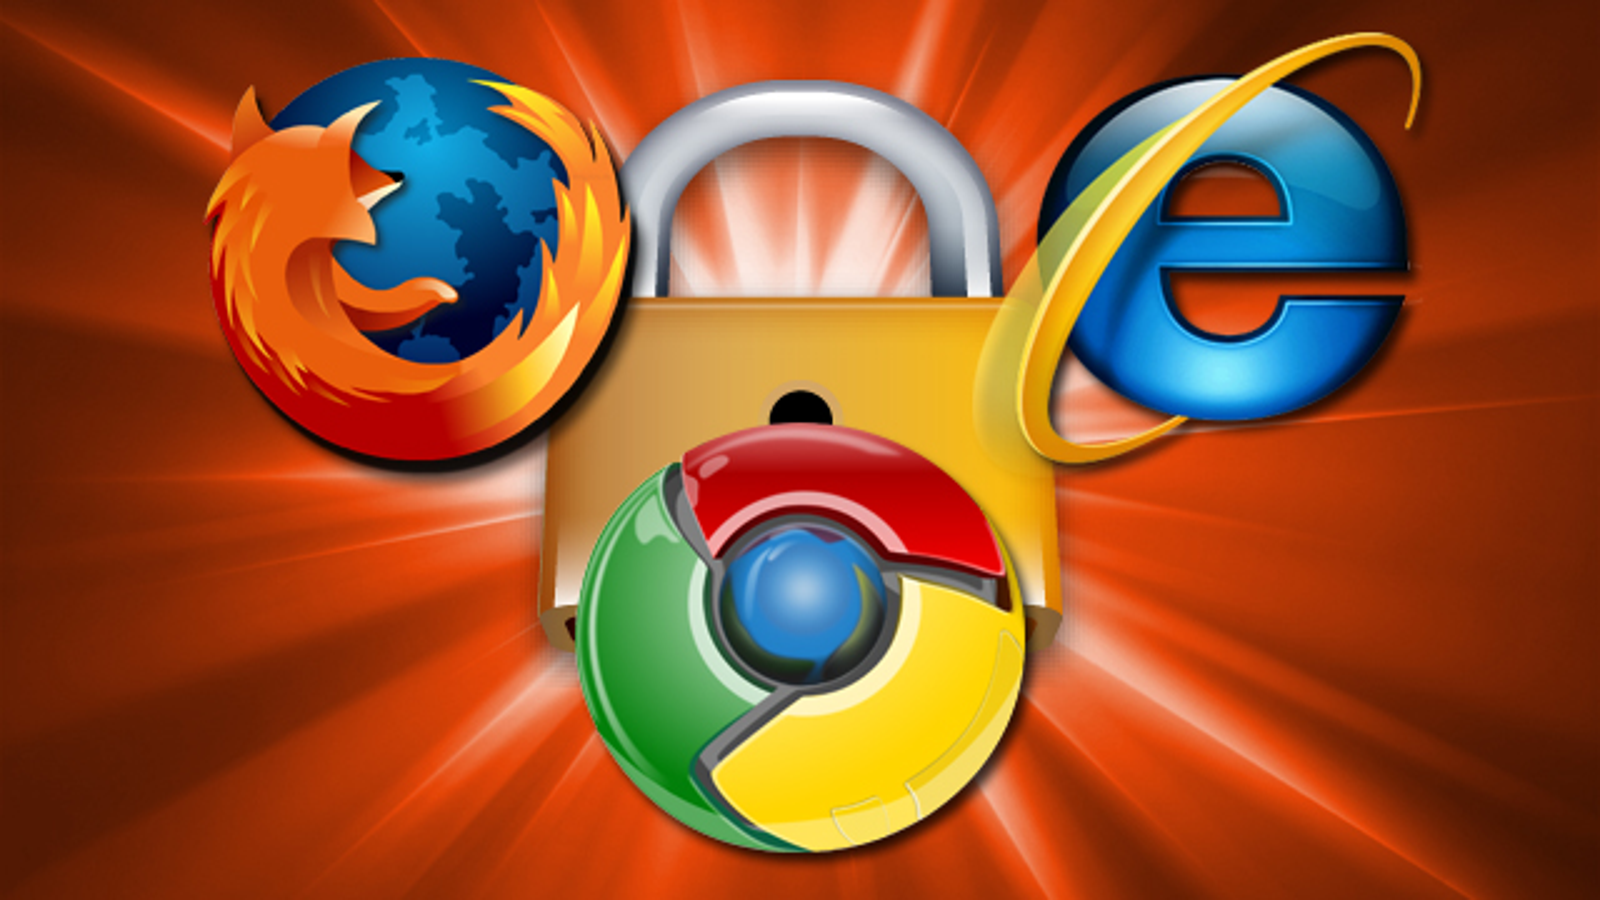 whats the most secure web browser